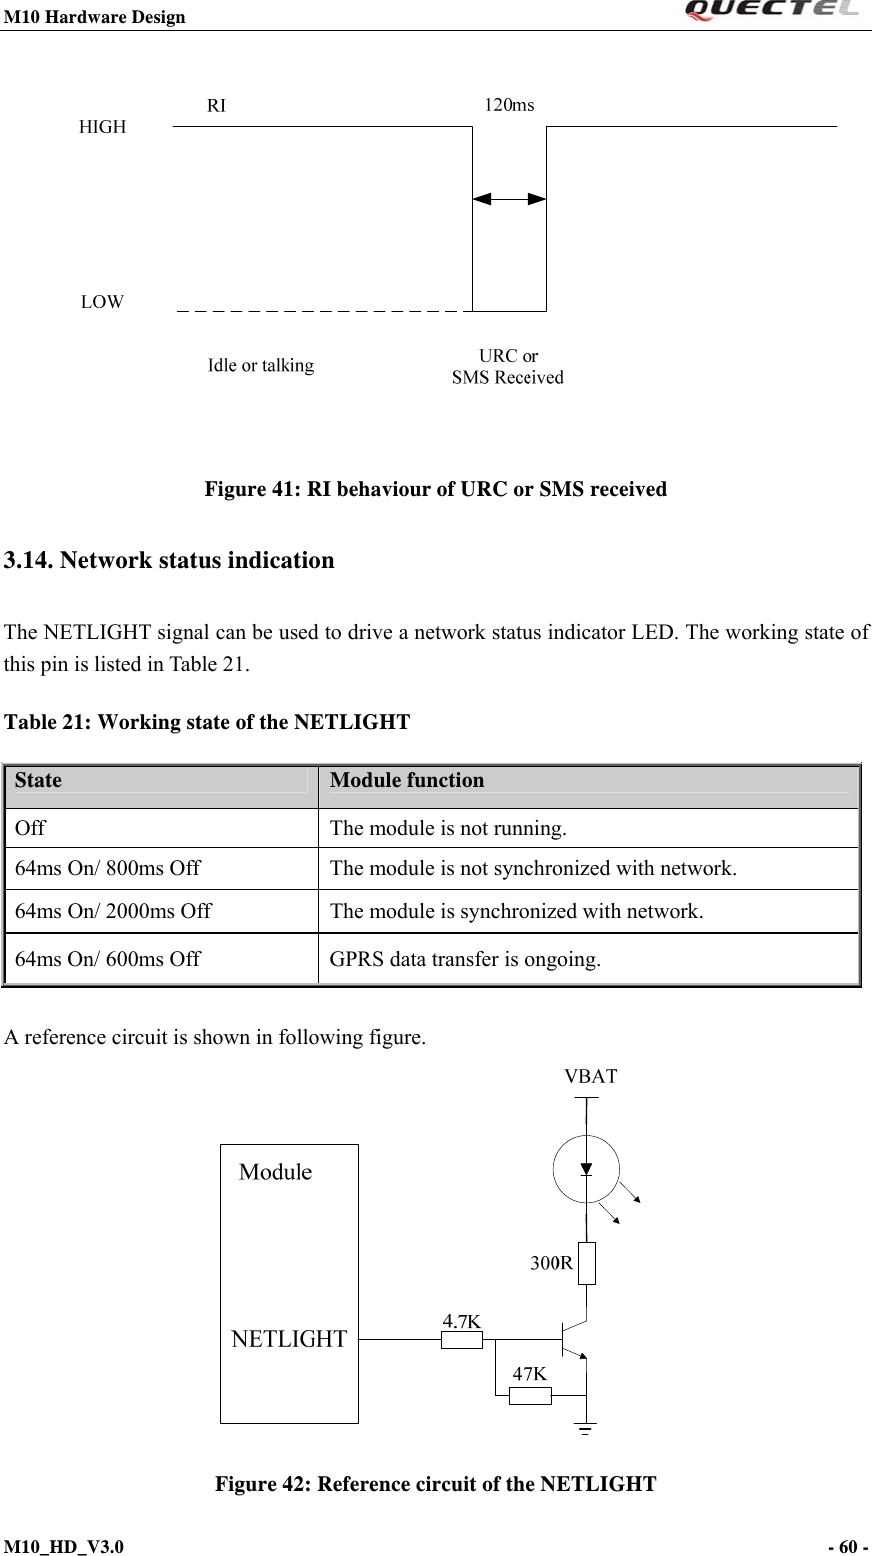 M10 Hardware Design                                                                 M10_HD_V3.0                                                                      - 60 -   Figure 41: RI behaviour of URC or SMS received 3.14. Network status indication   The NETLIGHT signal can be used to drive a network status indicator LED. The working state of this pin is listed in Table 21. Table 21: Working state of the NETLIGHT State  Module function Off  The module is not running. 64ms On/ 800ms Off  The module is not synchronized with network. 64ms On/ 2000ms Off  The module is synchronized with network. 64ms On/ 600ms Off  GPRS data transfer is ongoing.  A reference circuit is shown in following figure.  Figure 42: Reference circuit of the NETLIGHT 